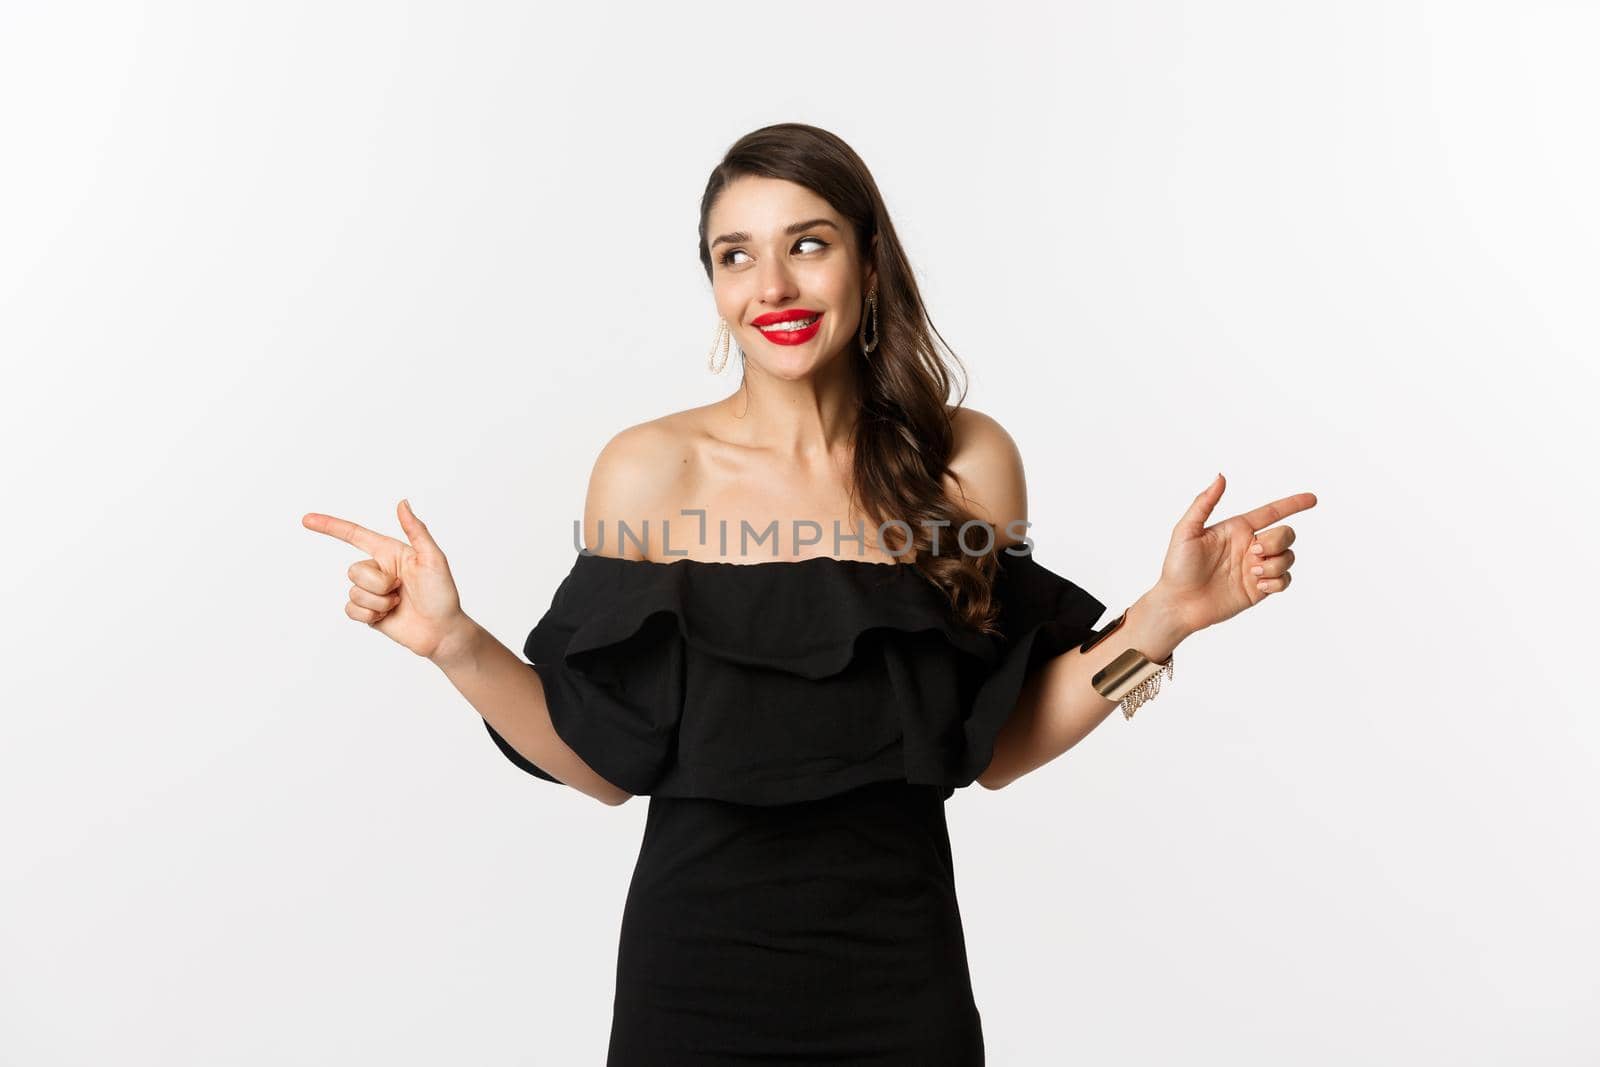 Fashion and beauty. Attractive woman in jewelry, makeup and black dress, smiling and pointing fingers sideways copy space offer, white background.